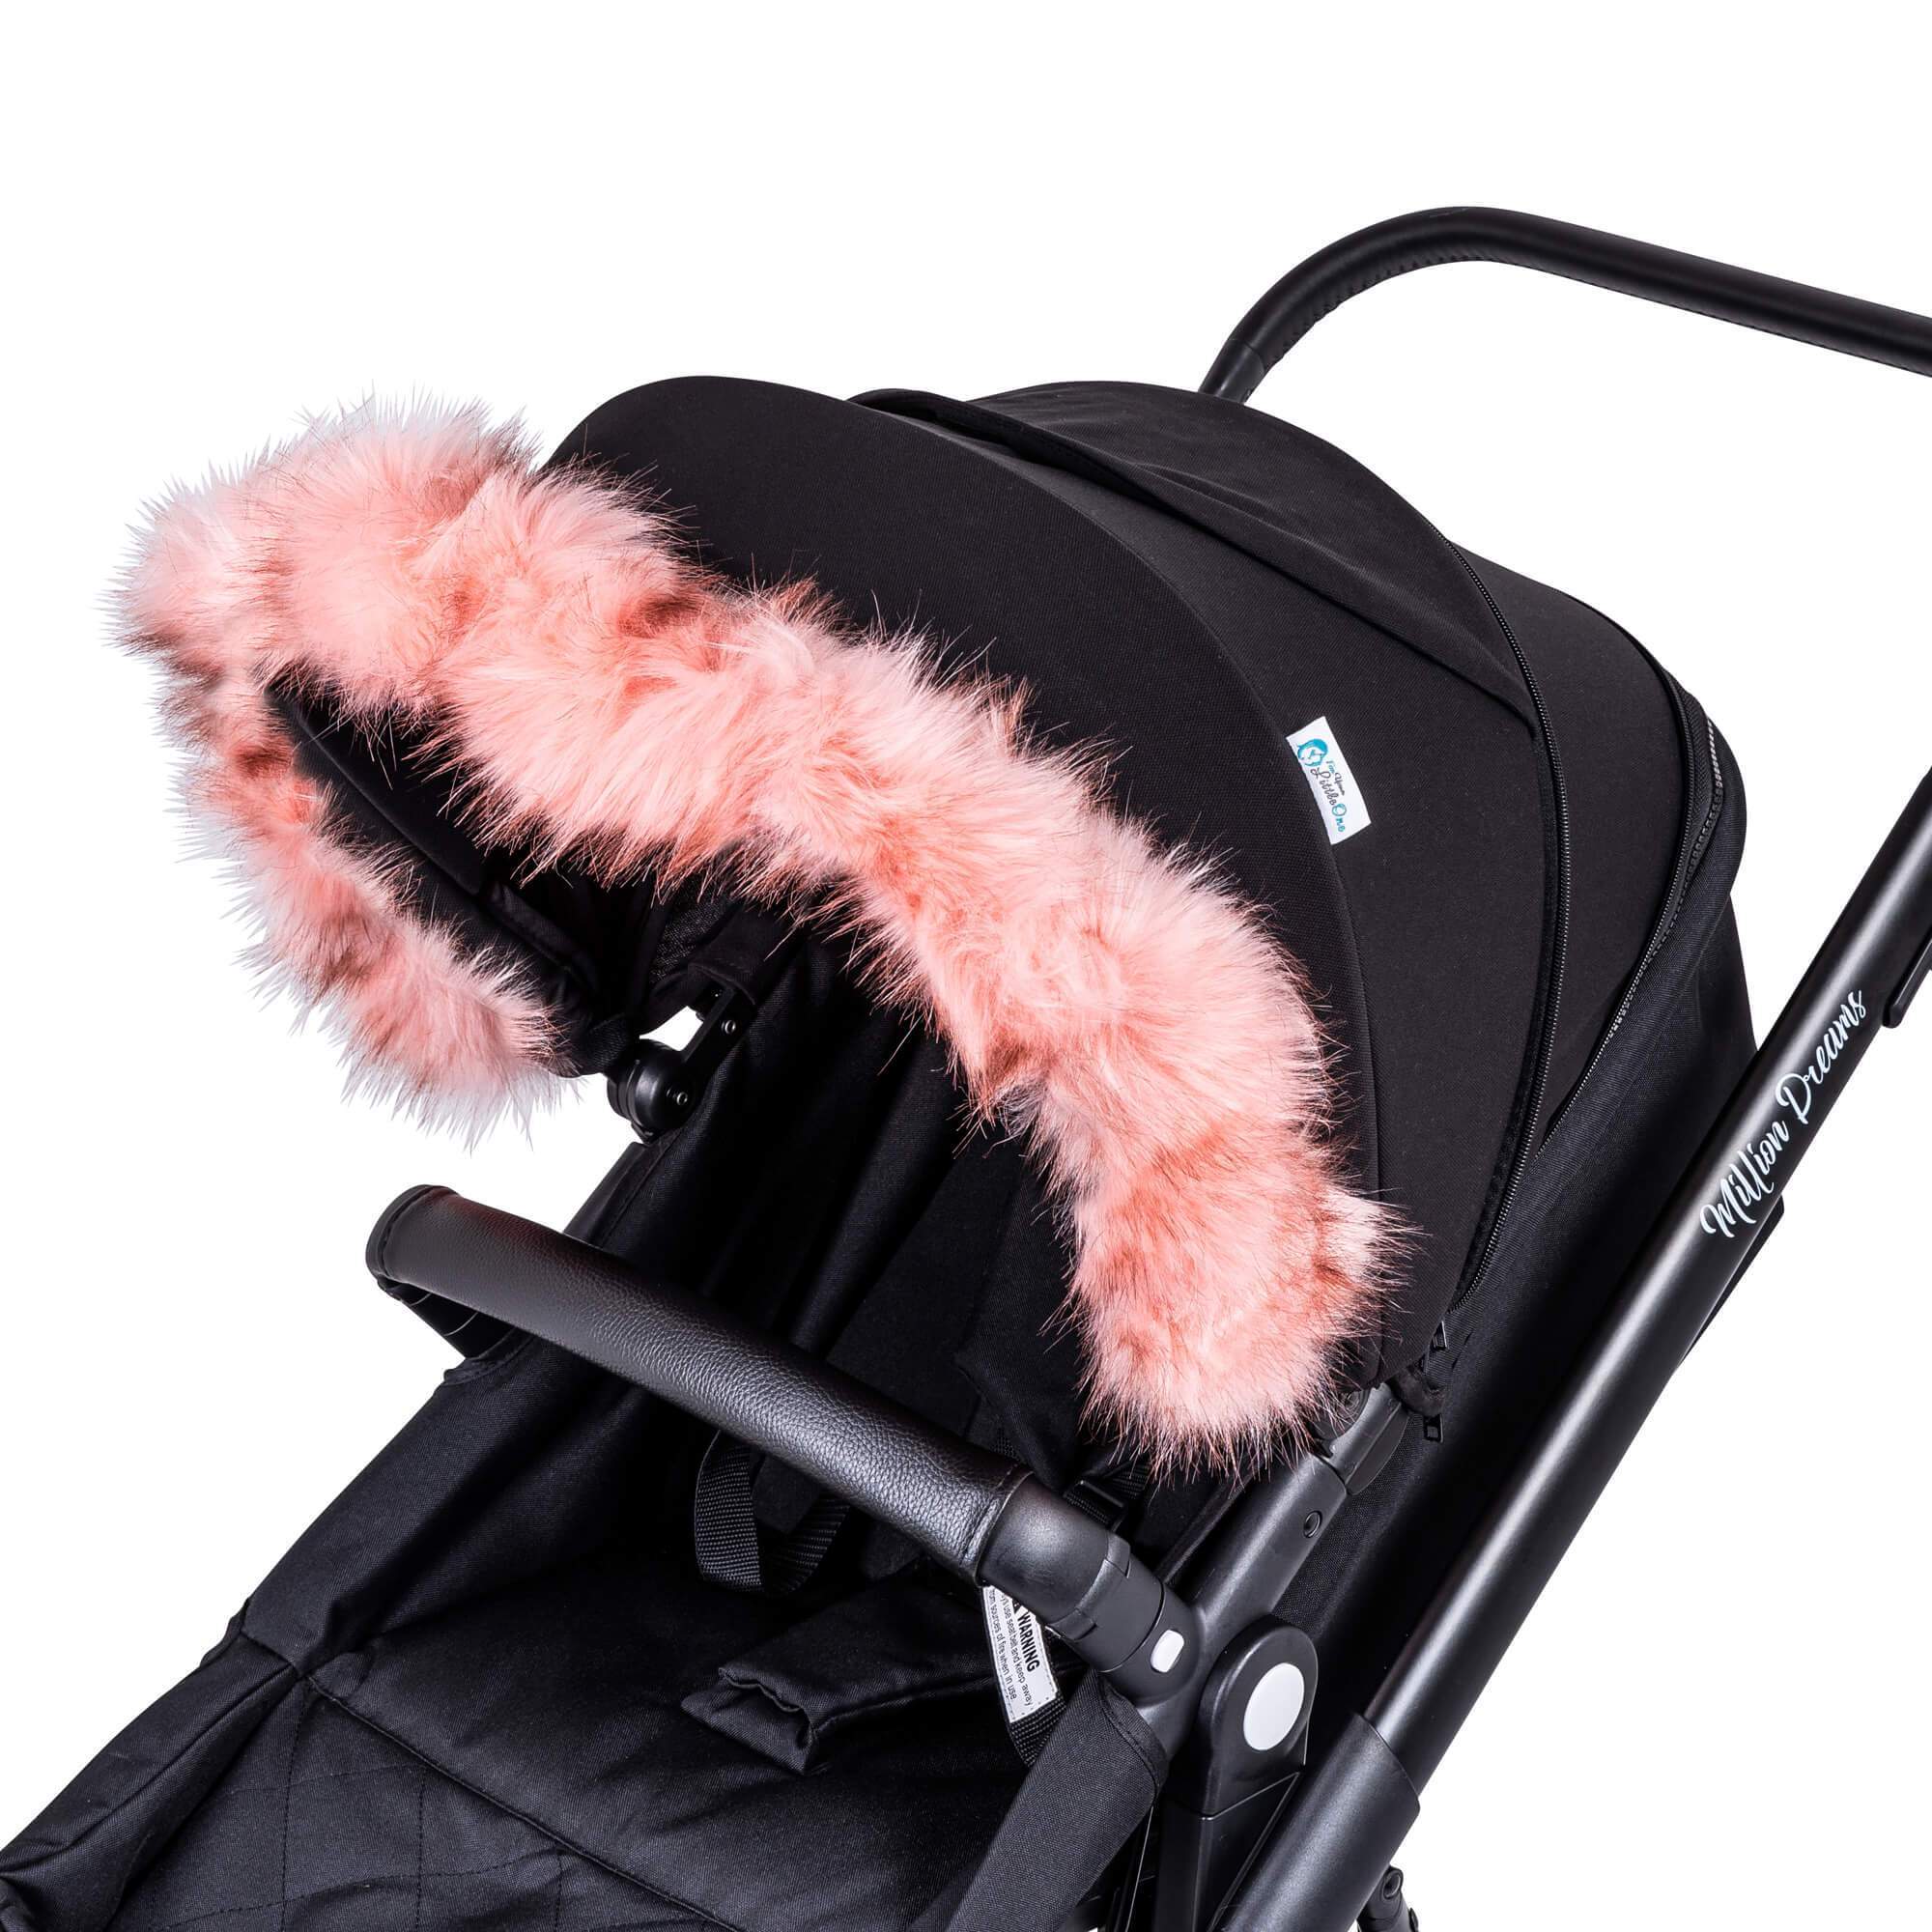 Pram Fur Hood Trim Attachment for Pushchair Compatible with DoBuggy - For Your Little One